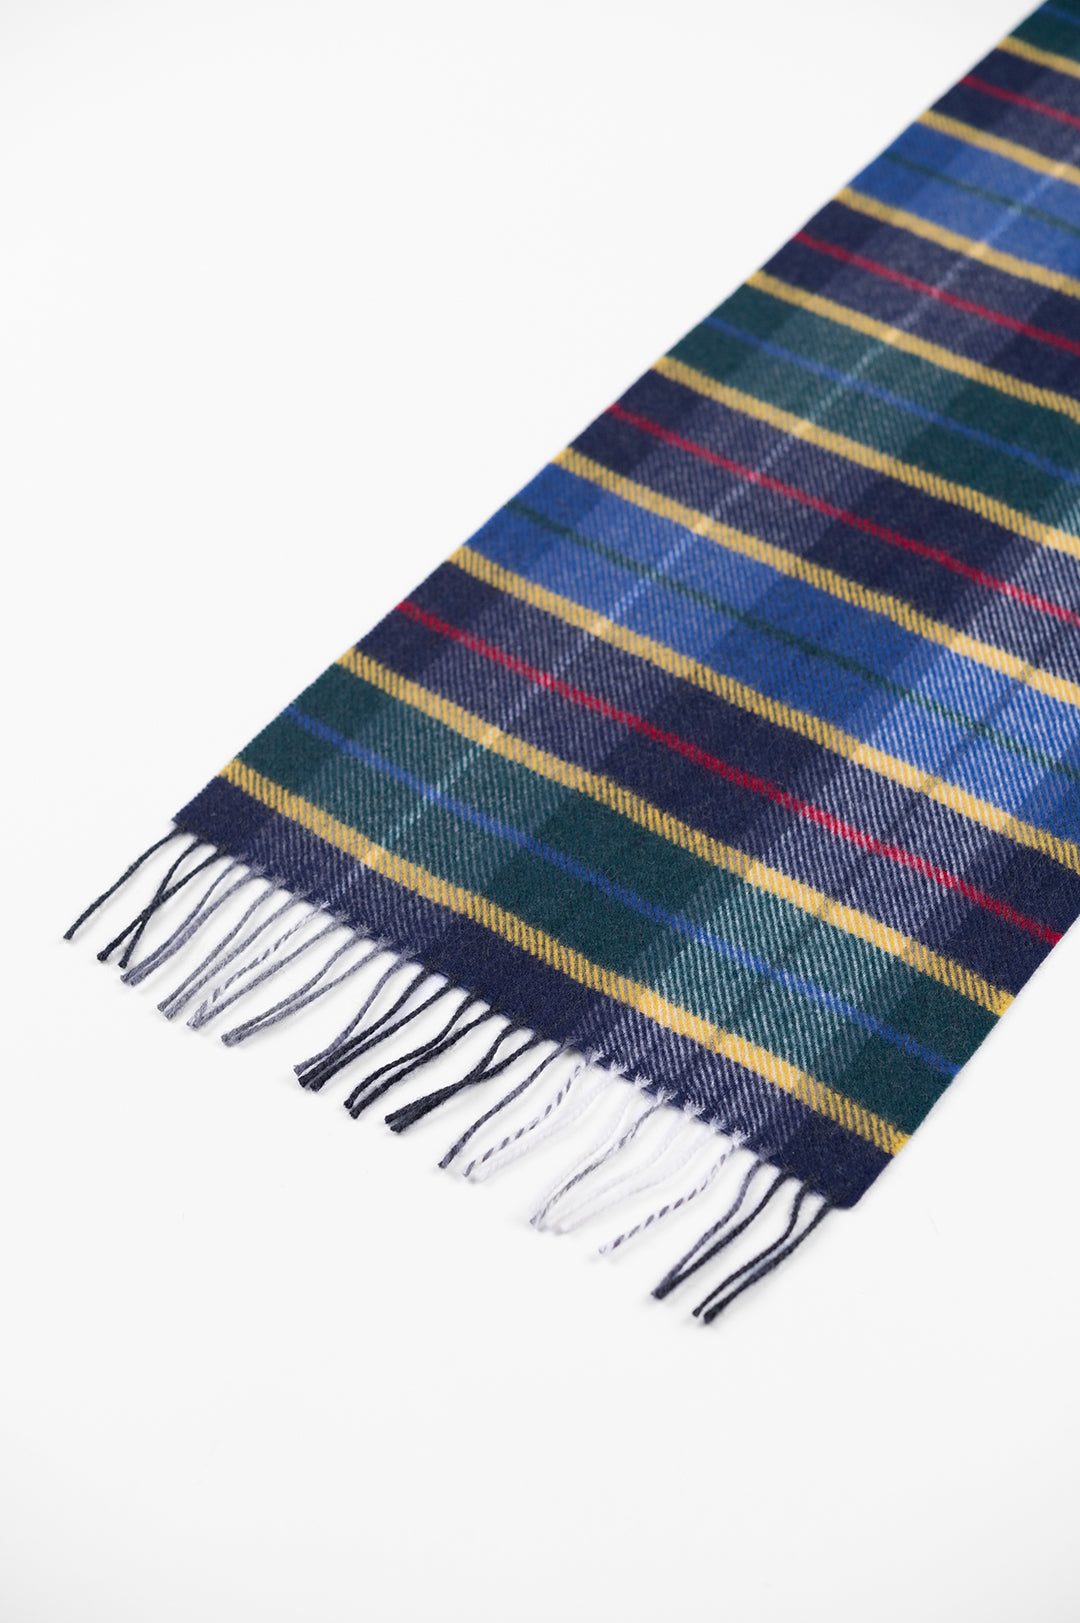 Scarf Merino Wool - Checked by Rotholz Made in Germany